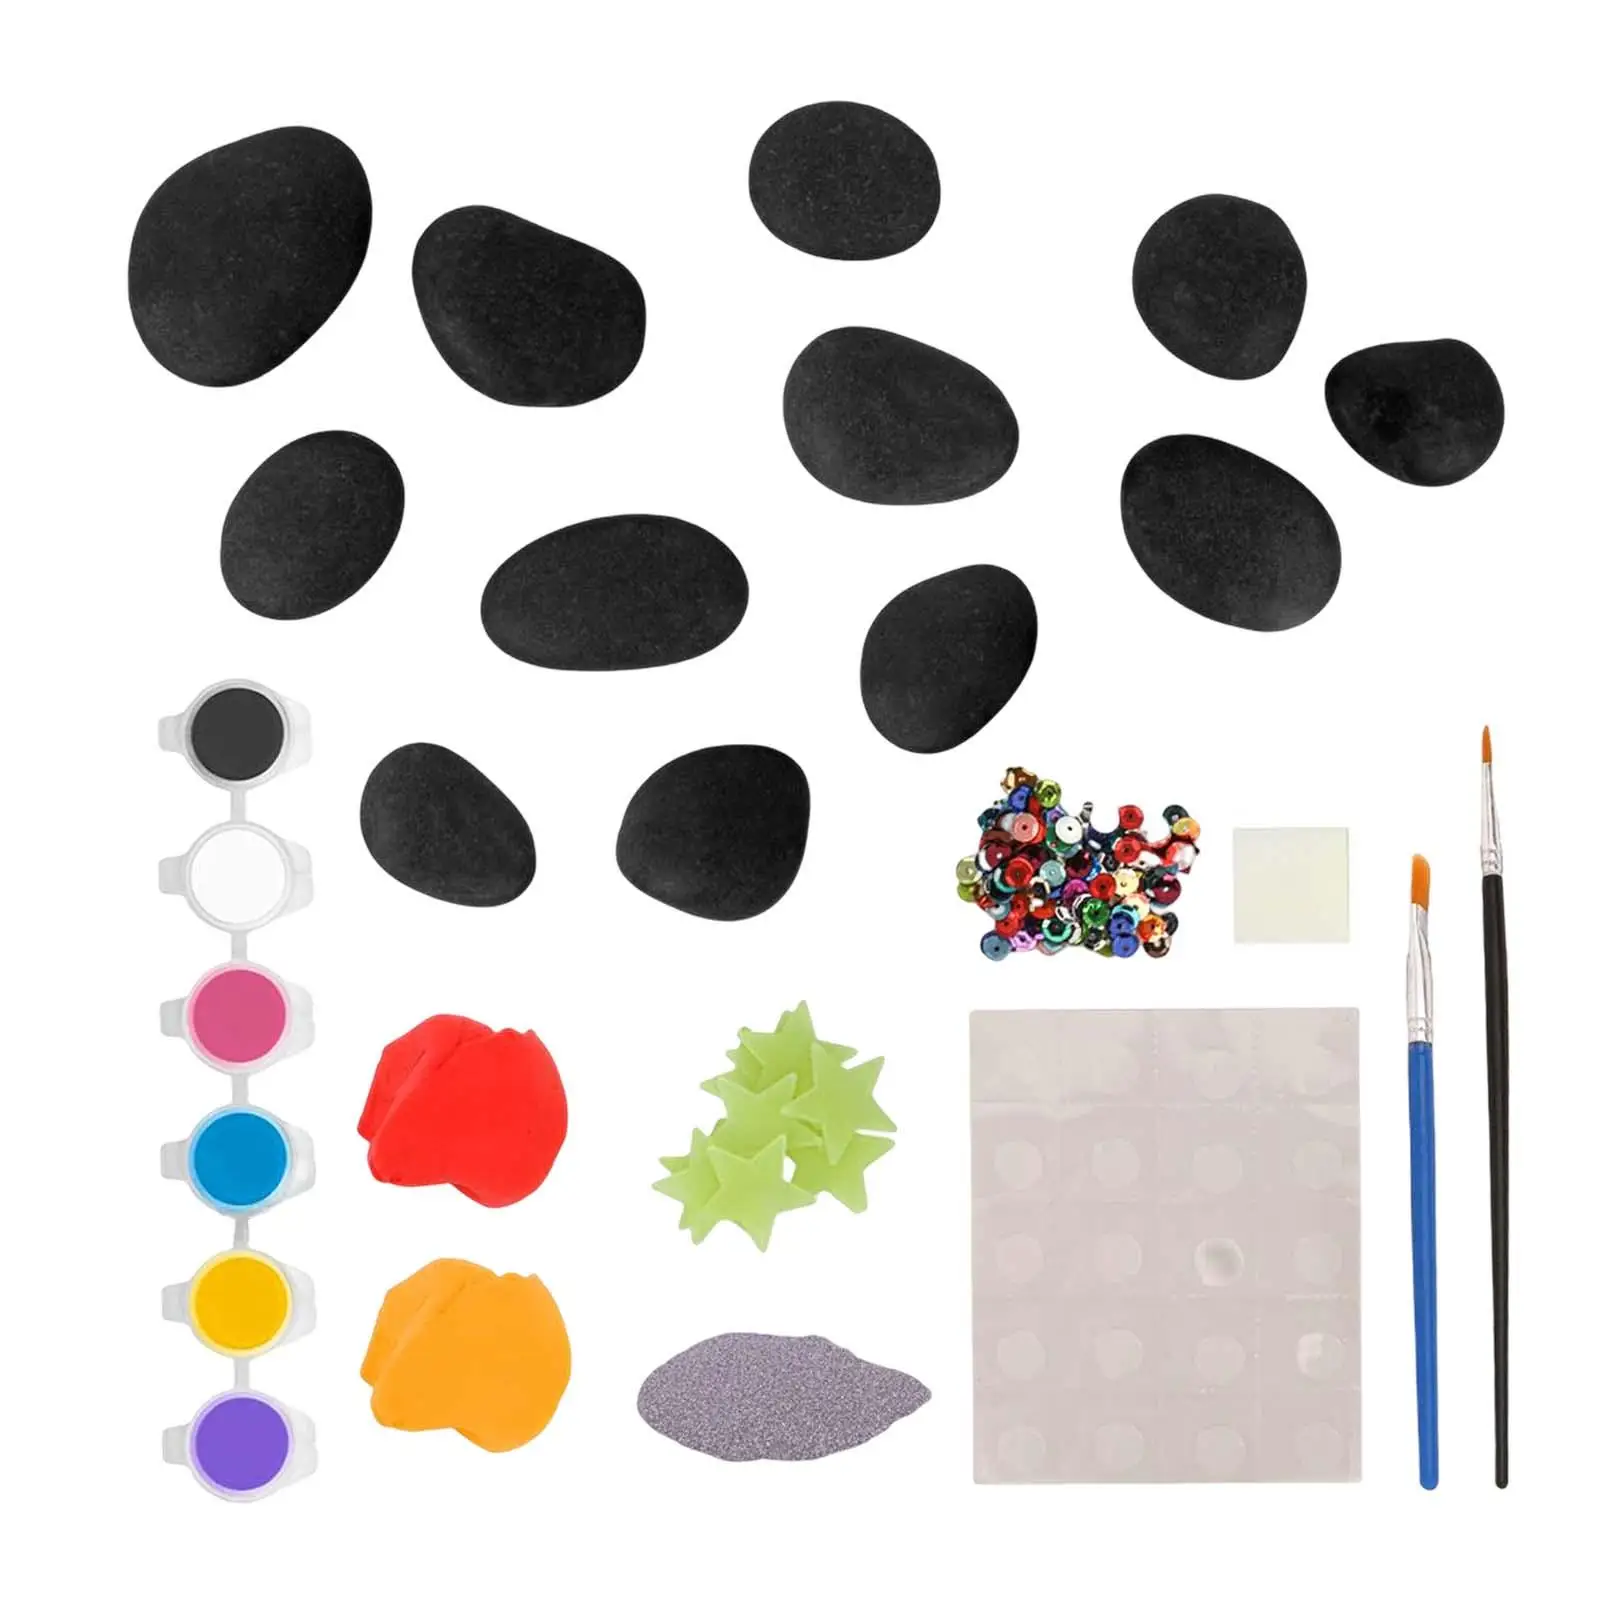 Creativity Painting Set Activities Kids Toys Arts and Crafts Painting Kit for Boy Children Girl